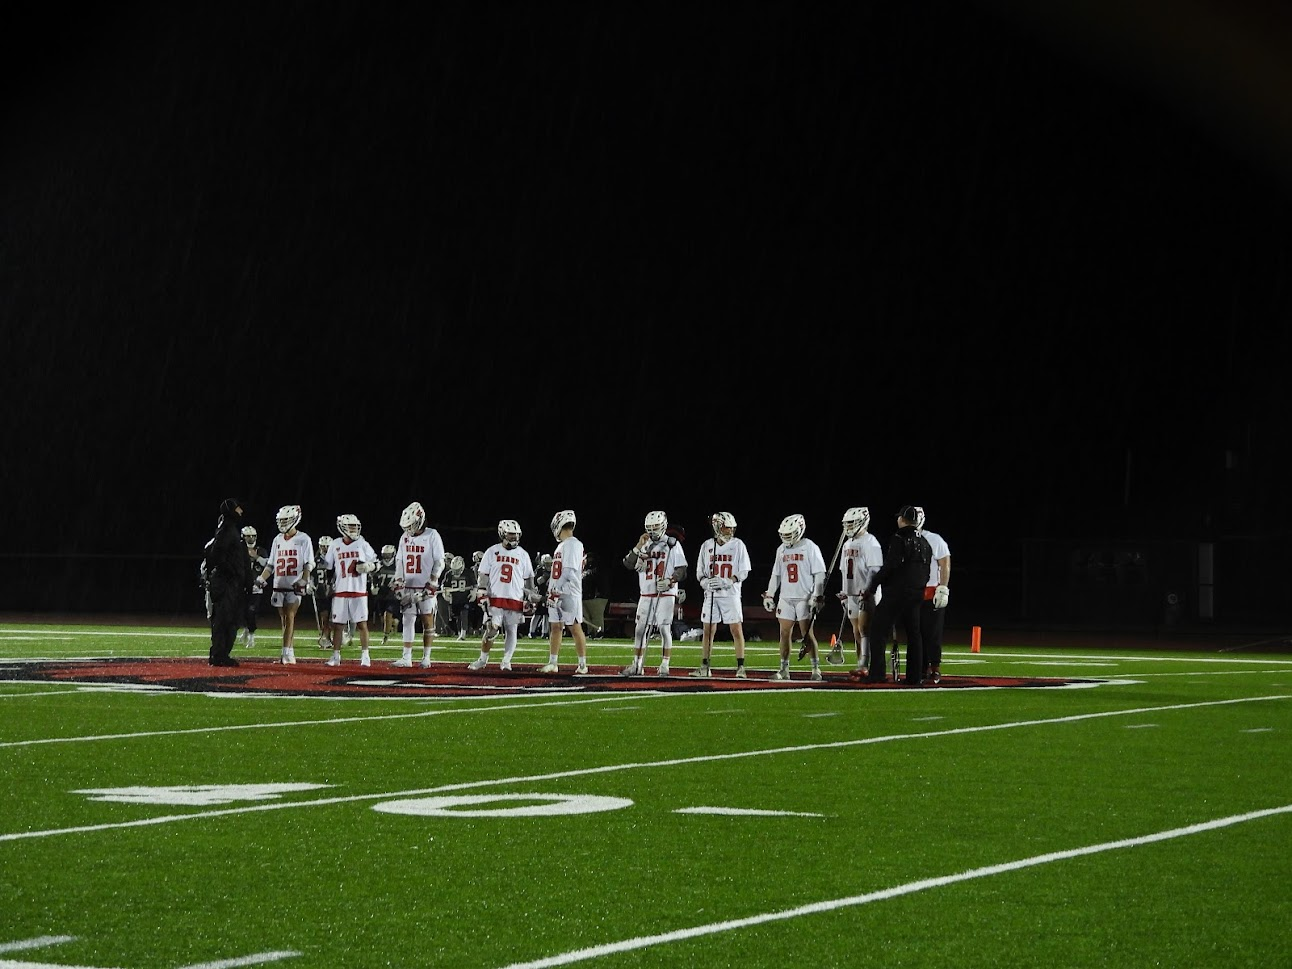 Men's lacrosse has their first home opener of the Spring 2023 season